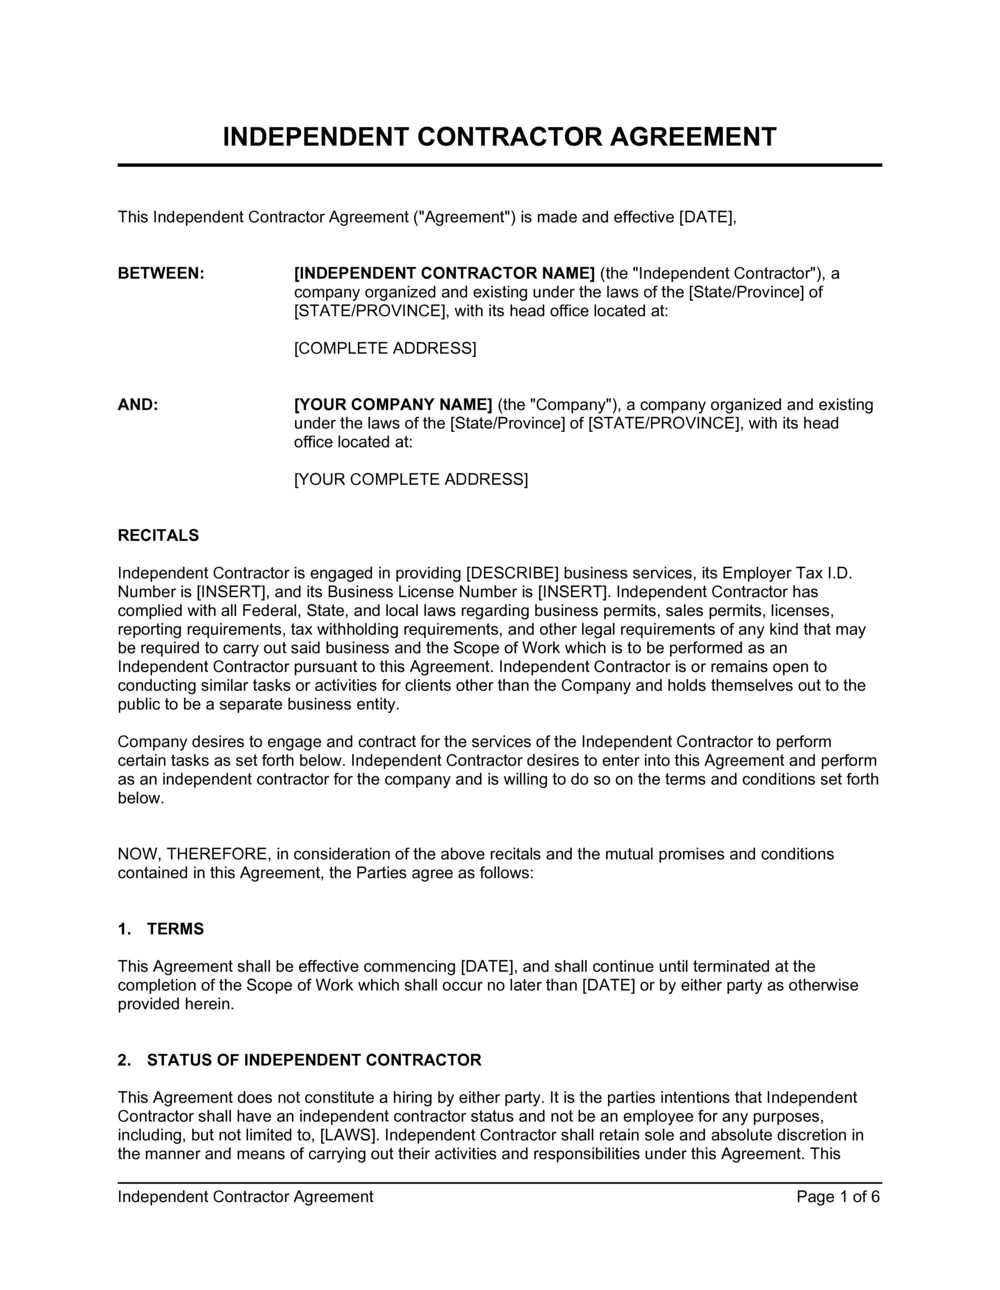 Independent Contractor Agreement Template  by Business-in-a-Box™